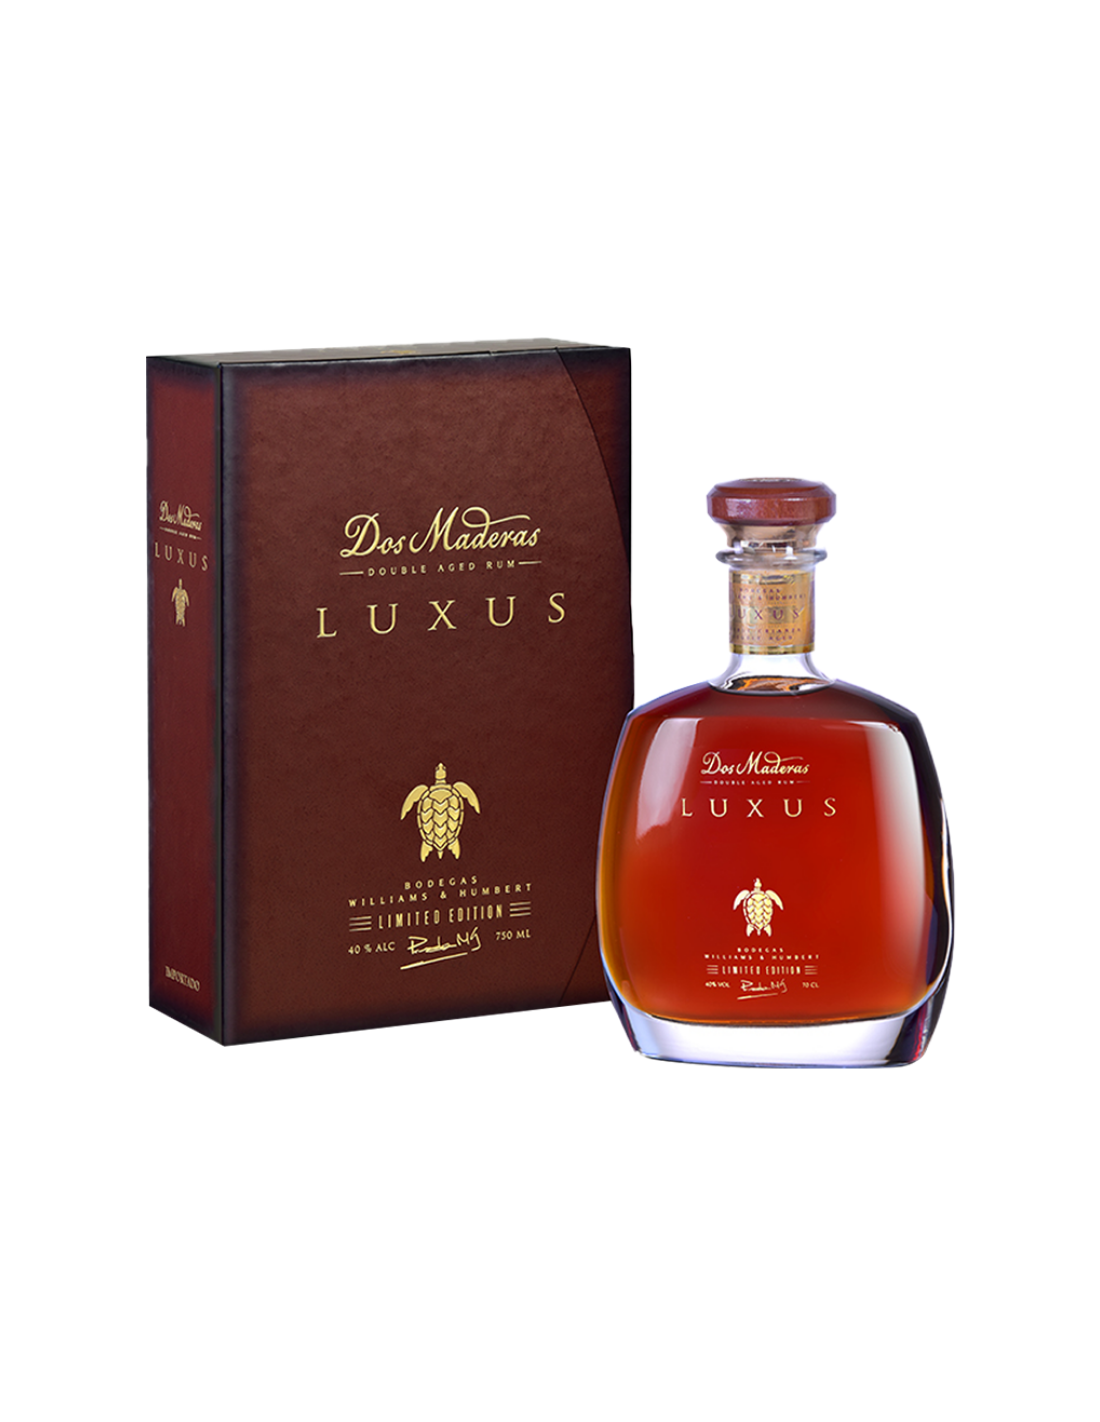 Rom negru Dos Maderas Luxus Double Aged, 40% alc., 0.7L, 15 ani, Spania alcooldiscount.ro